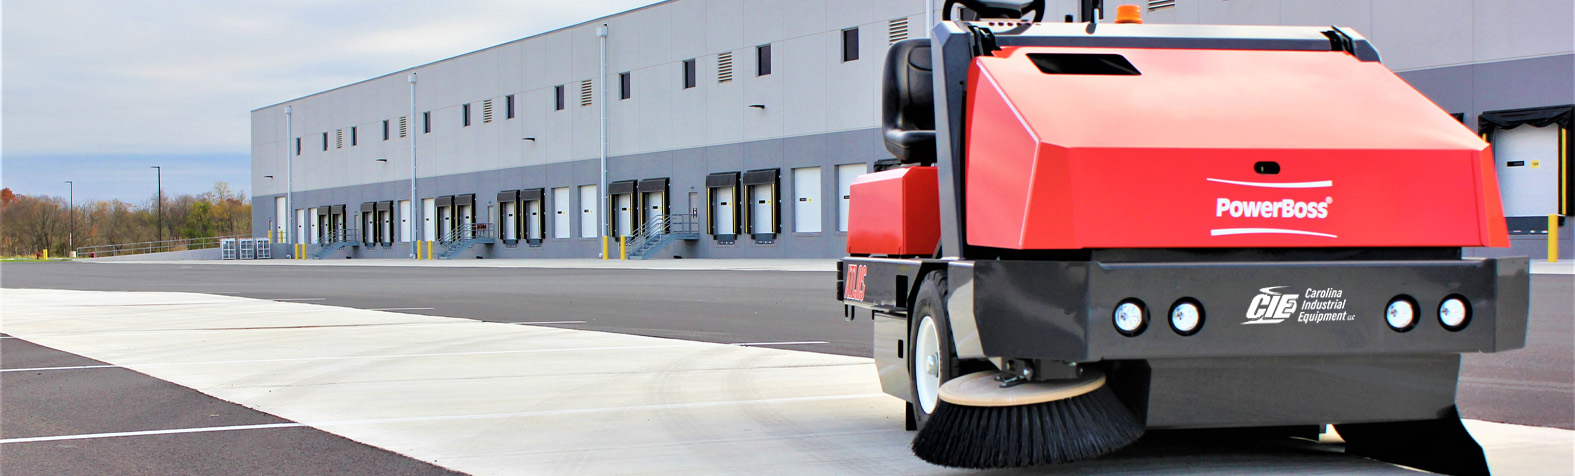 Floor Scrubbers Sweepers- Warehousing and Distribution Applications- Carolina Industrial Equipment